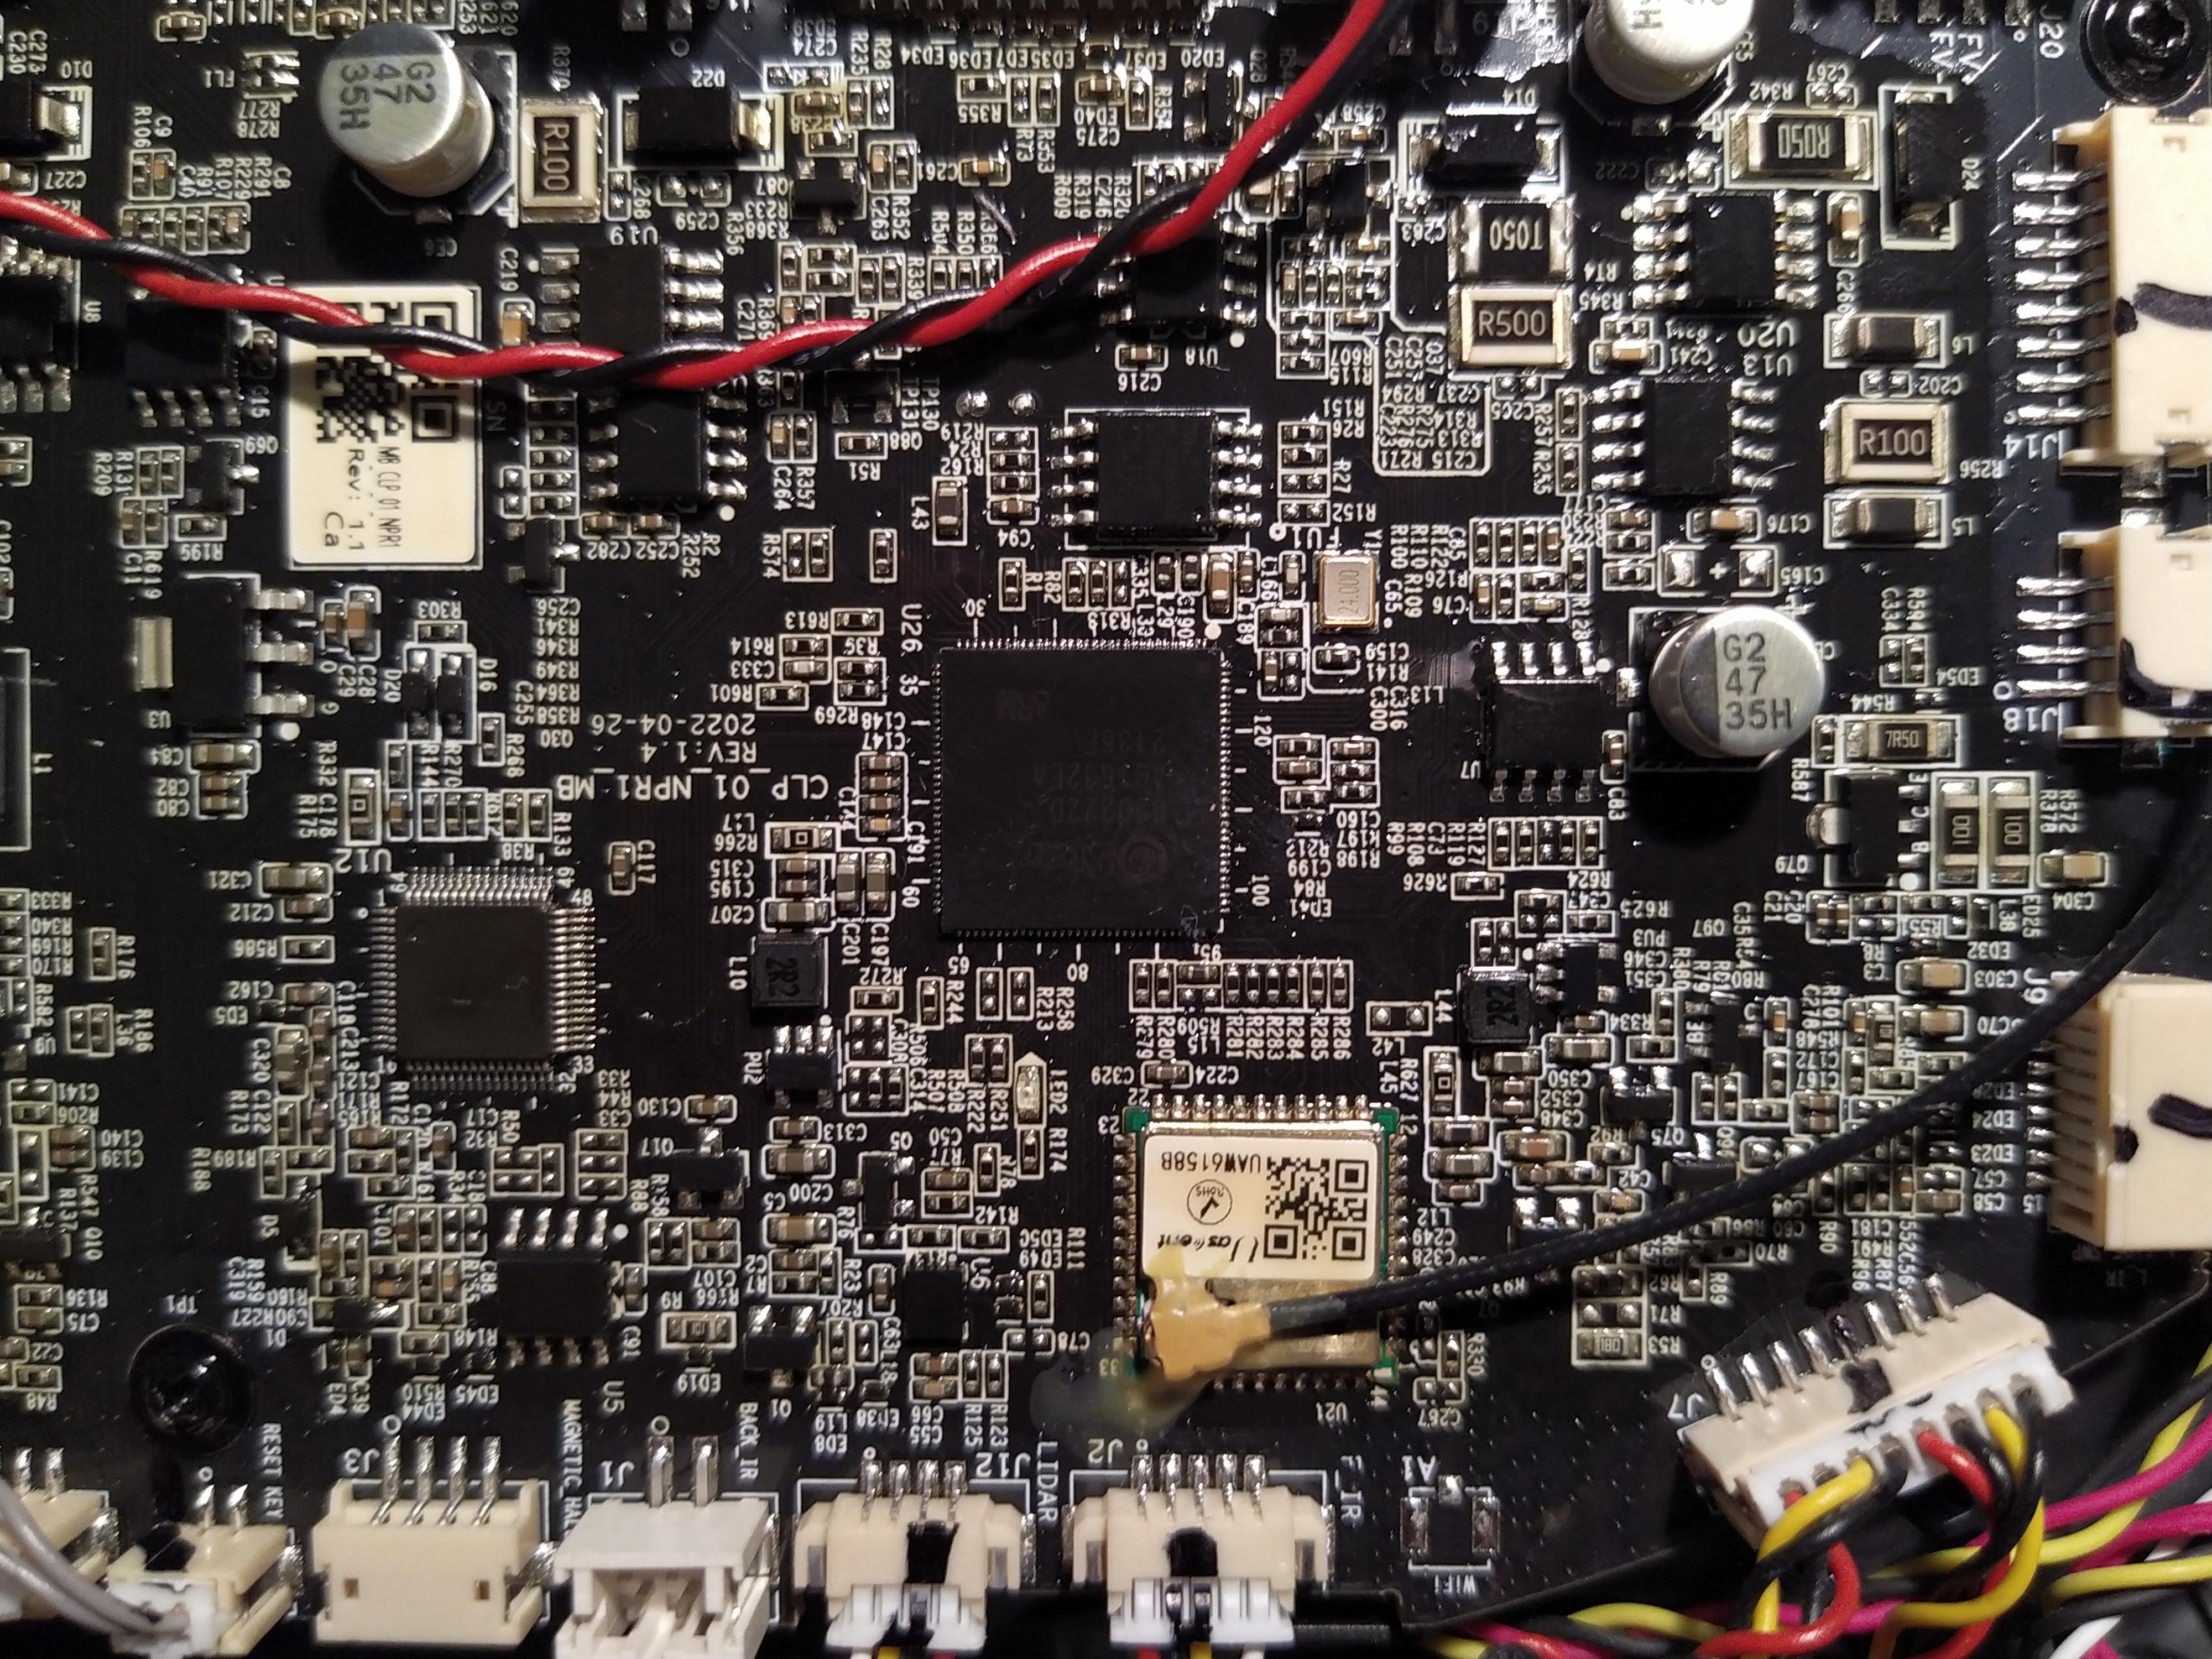 Detailed mainboard image